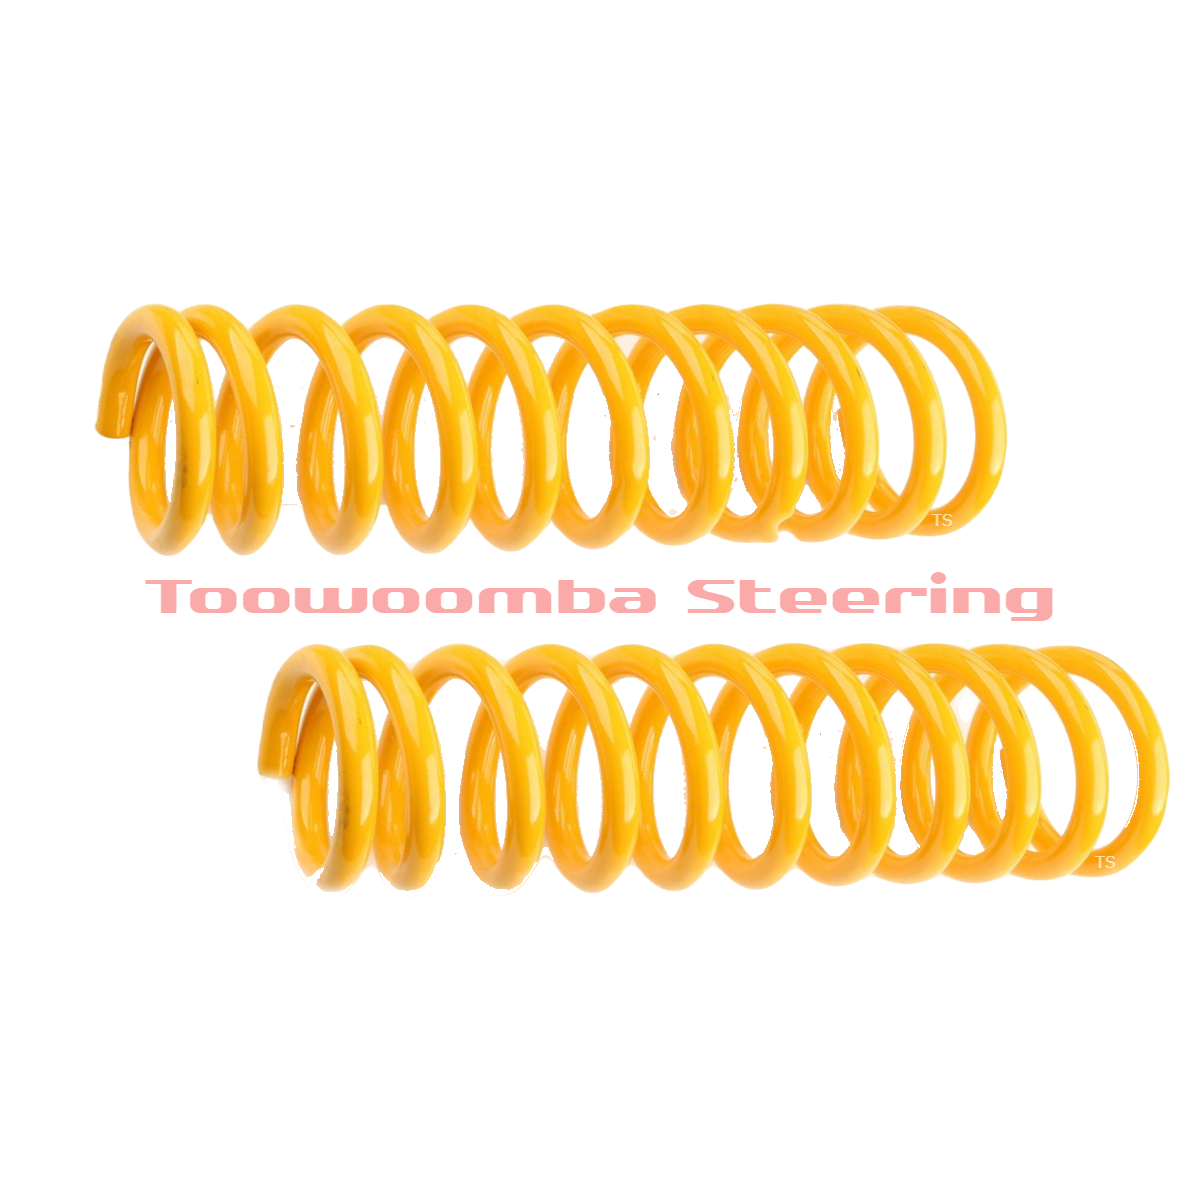 Front Lowered King Springs  -  Ideal for -  Holden Commodore VE 6CYL & 8CYL SEDAN 8/06-4/13, Holden Commodore VE 6CYL & 8CYL SPORTWAGON 8/06-4/13, Holden Commodore VE 6CYL & 8CYL UTE 10/07-4/13  - (KHFL-150SSL)